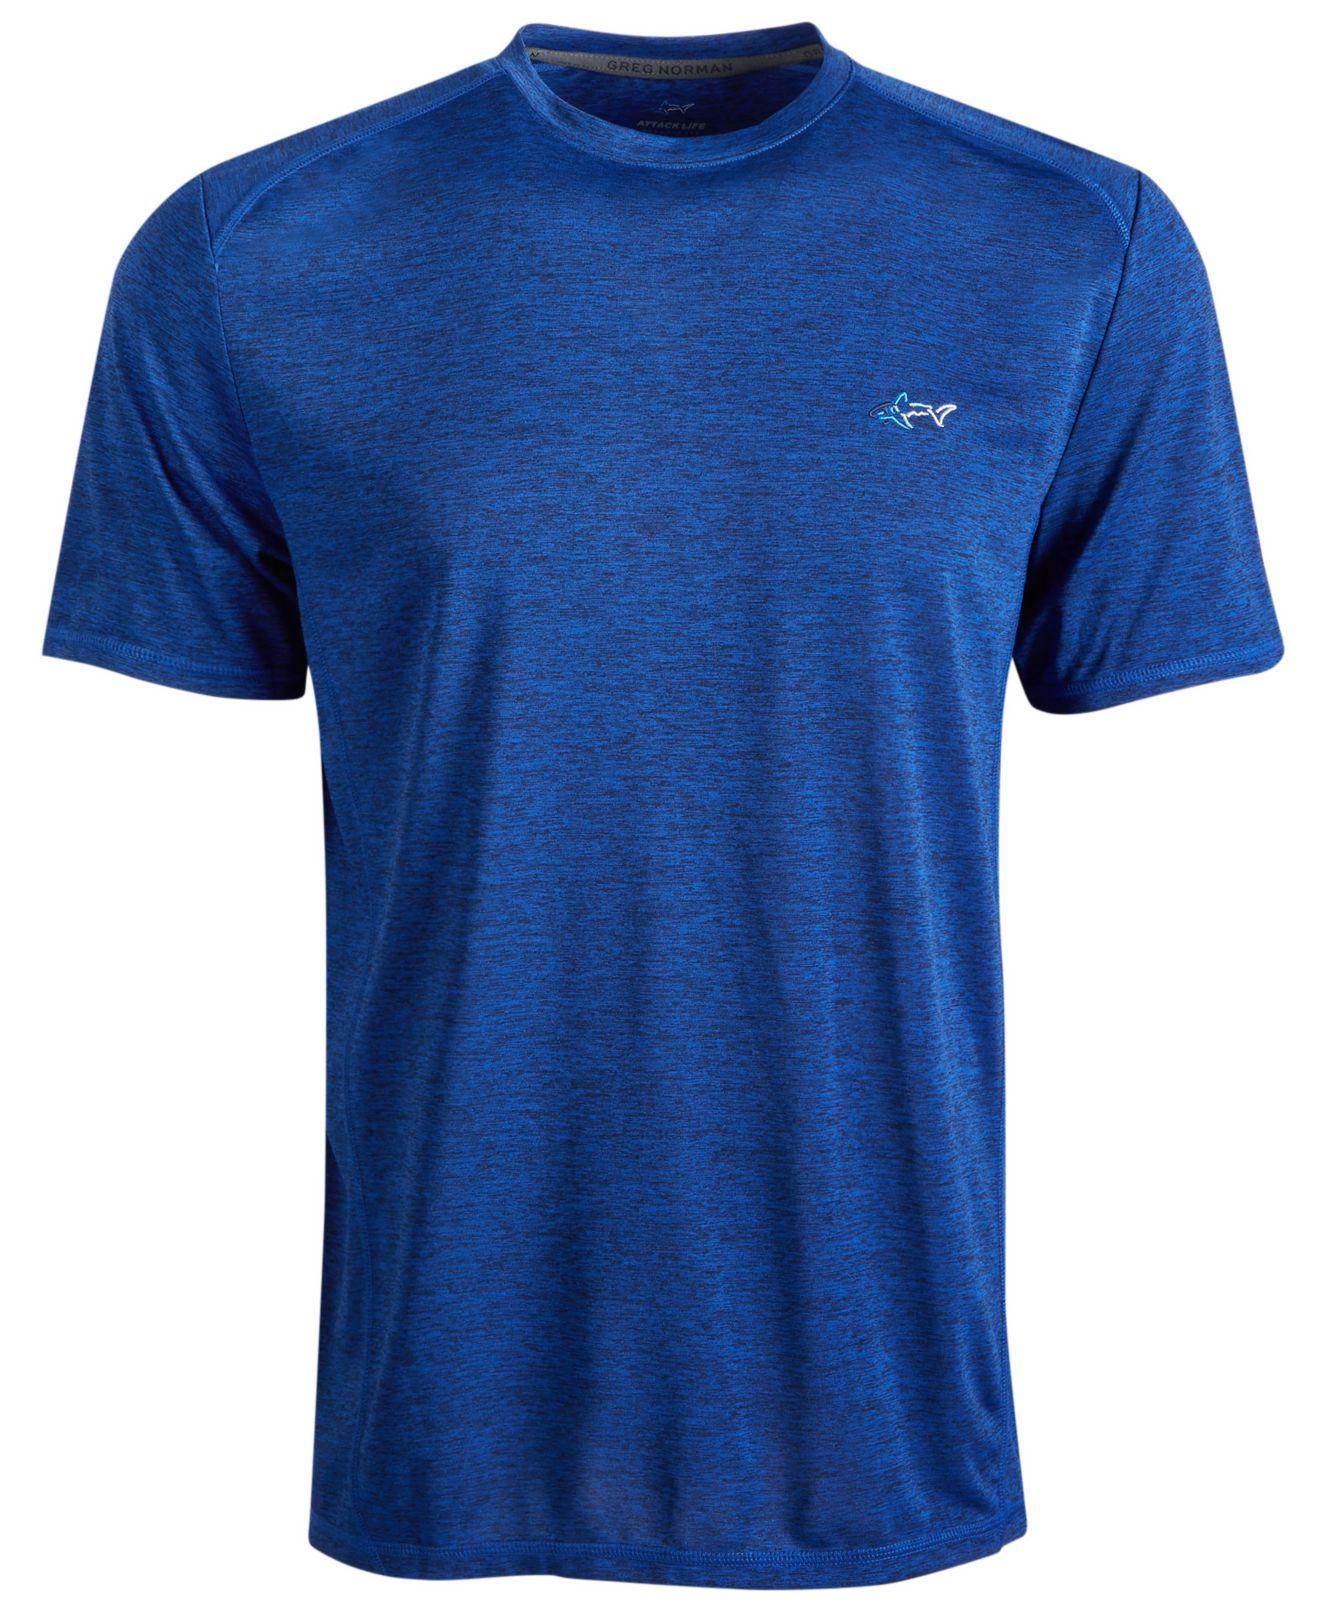 Greg Norman Heathered Performance T-shirt in Blue for Men - Lyst